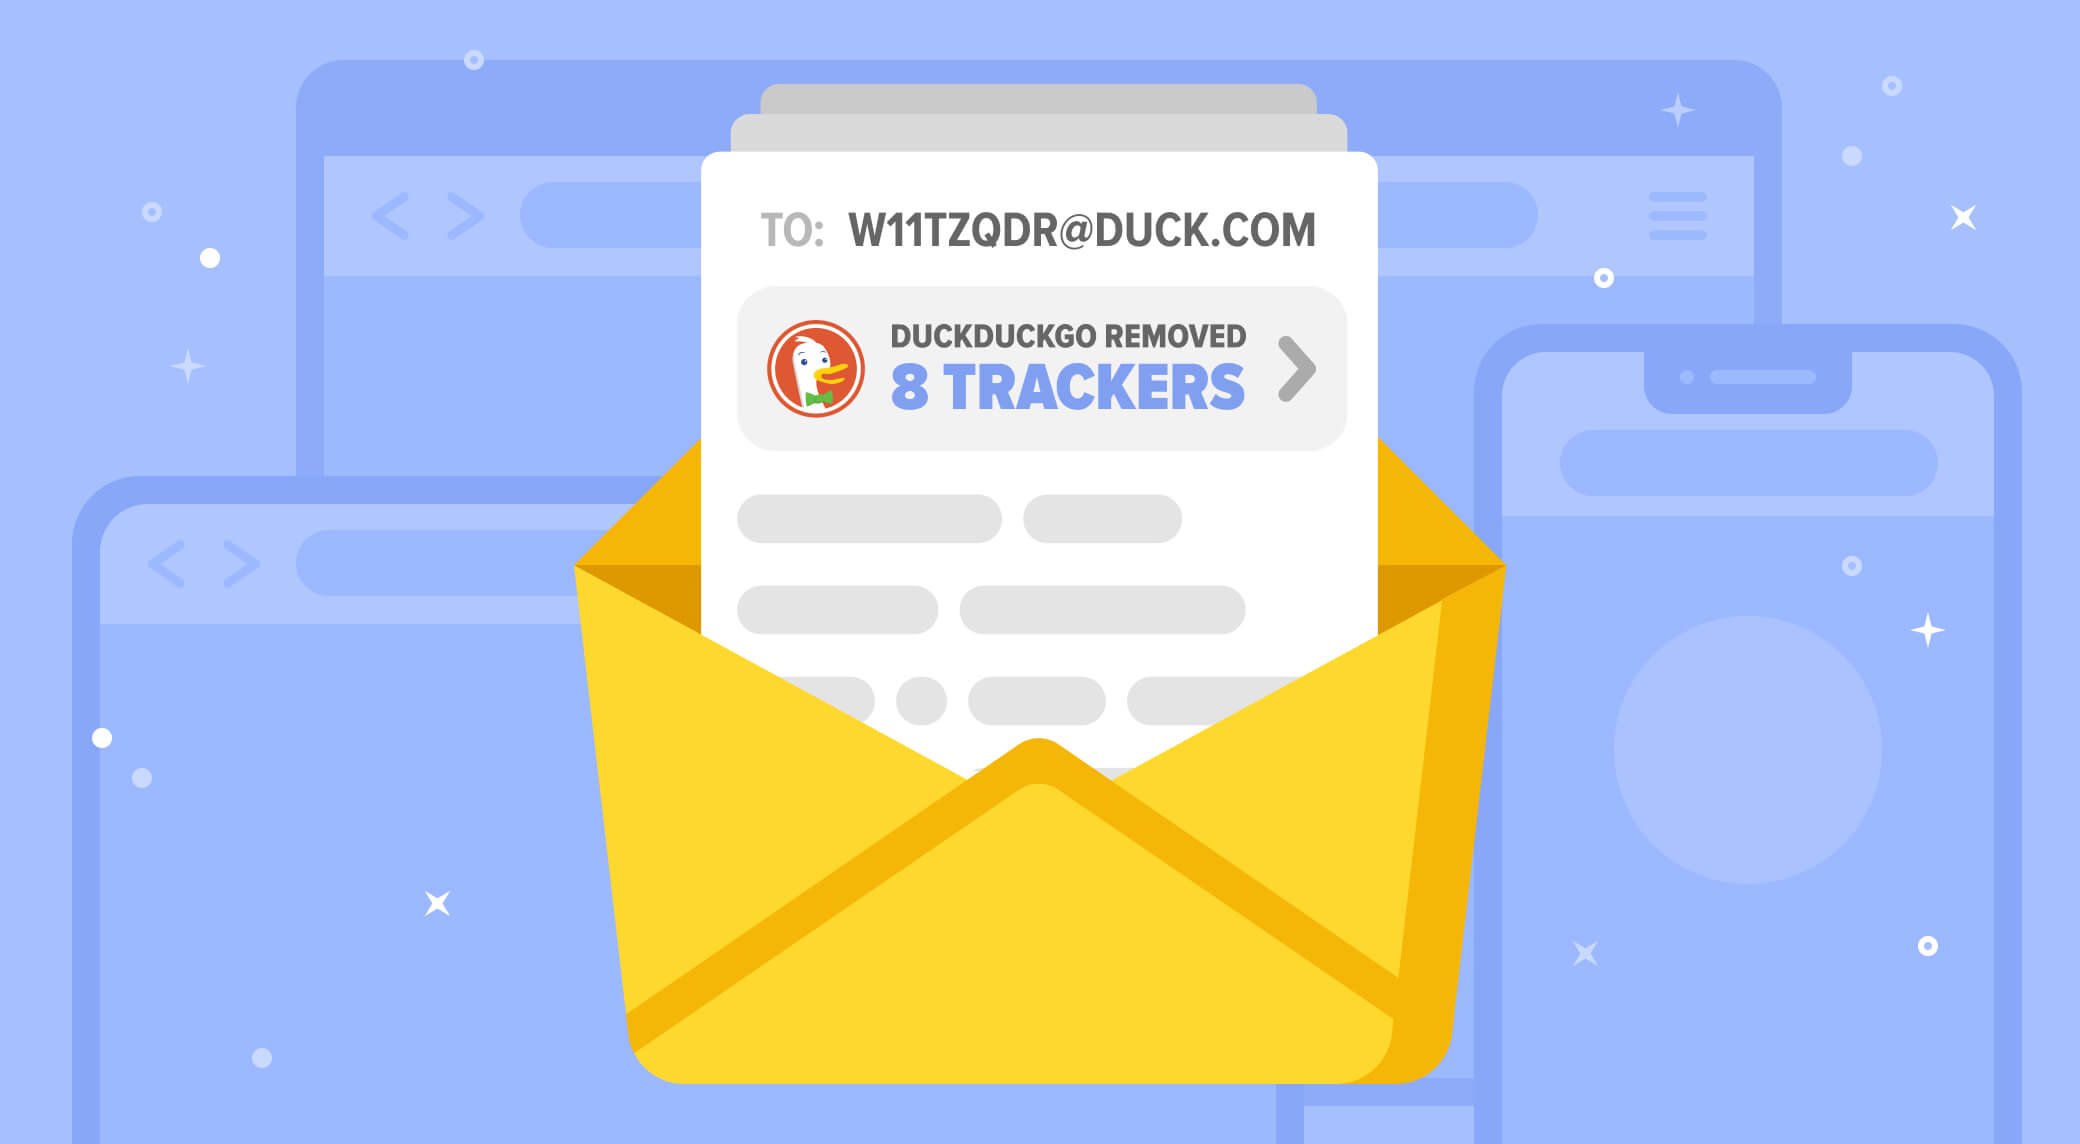 DuckDuckGo's privacy-focused email service now open to all